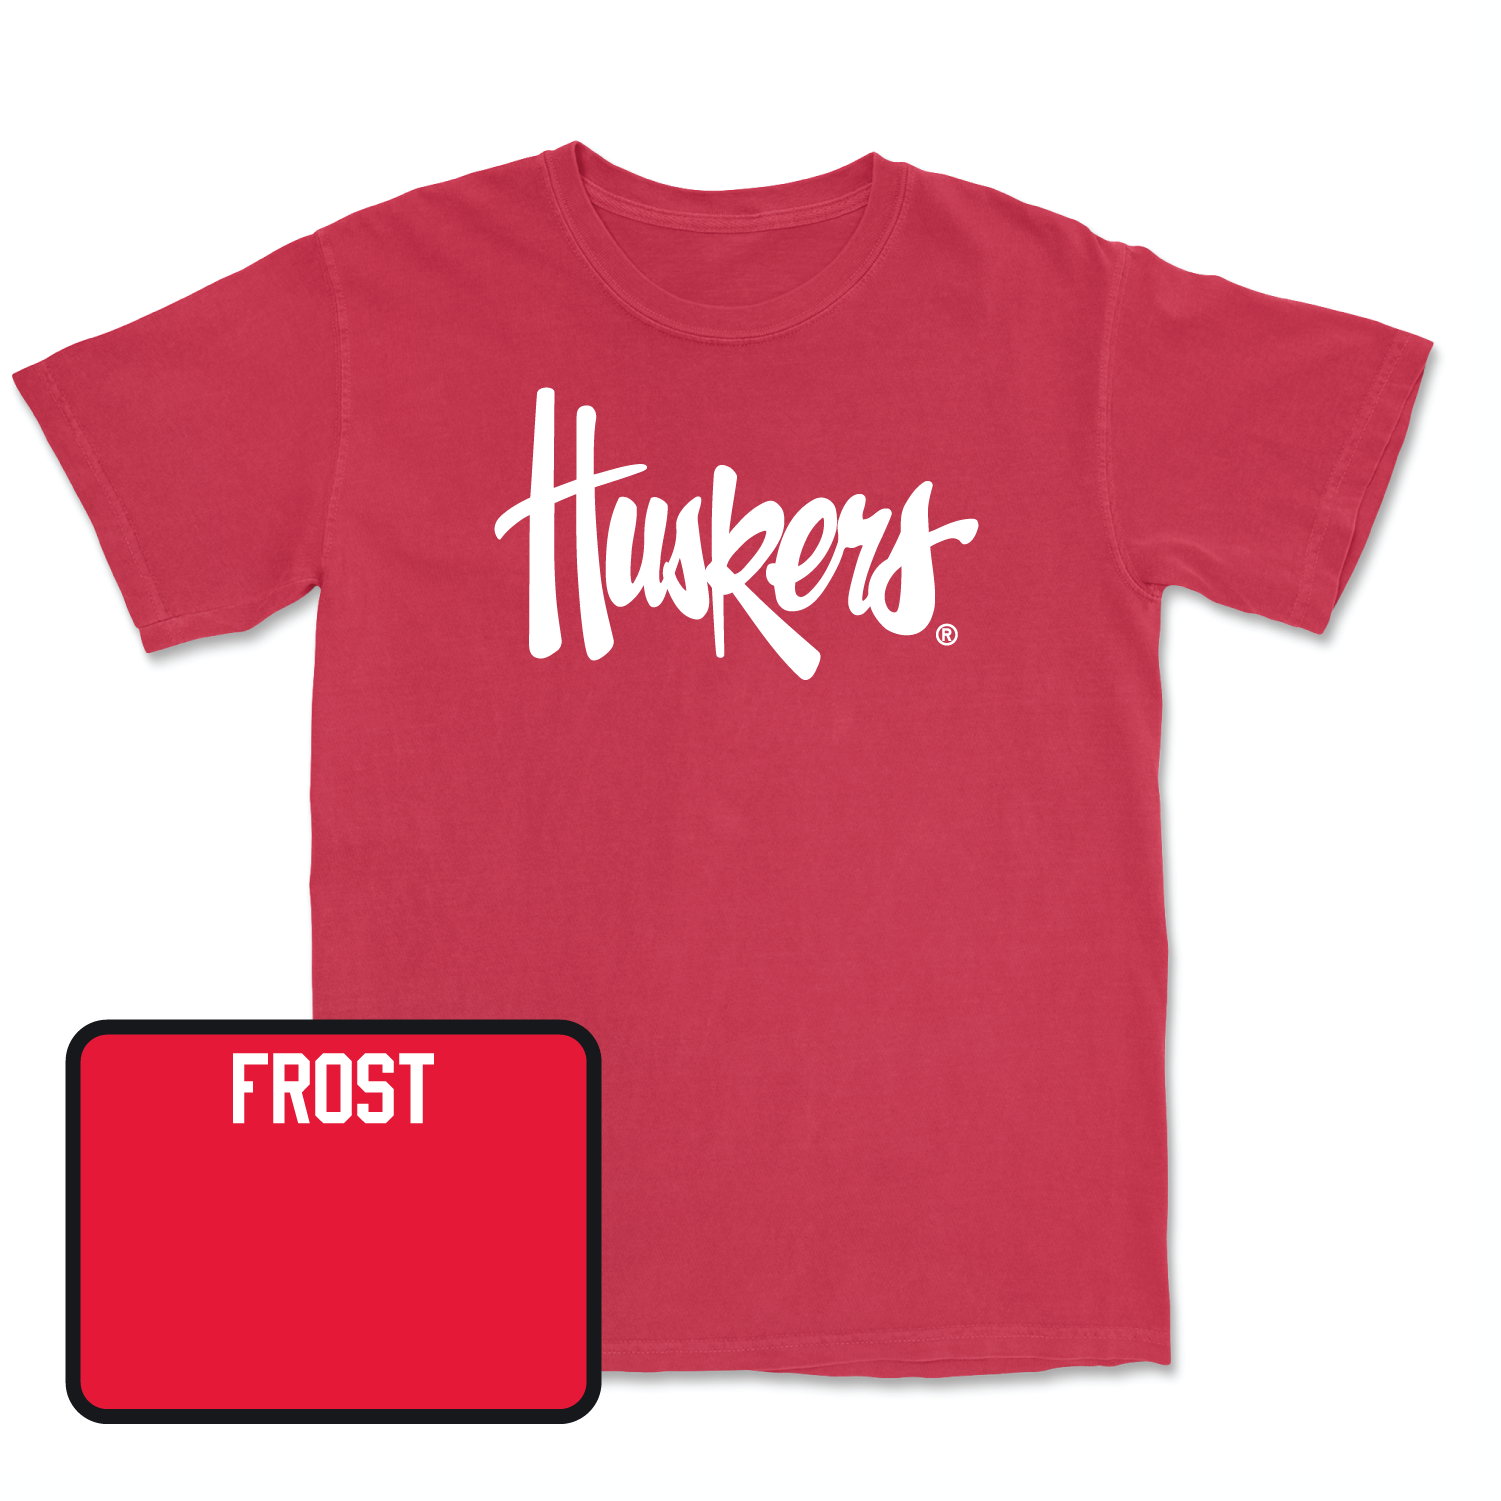 Red Women's Gymnastics Huskers Tee X-Large / Emalee Frost